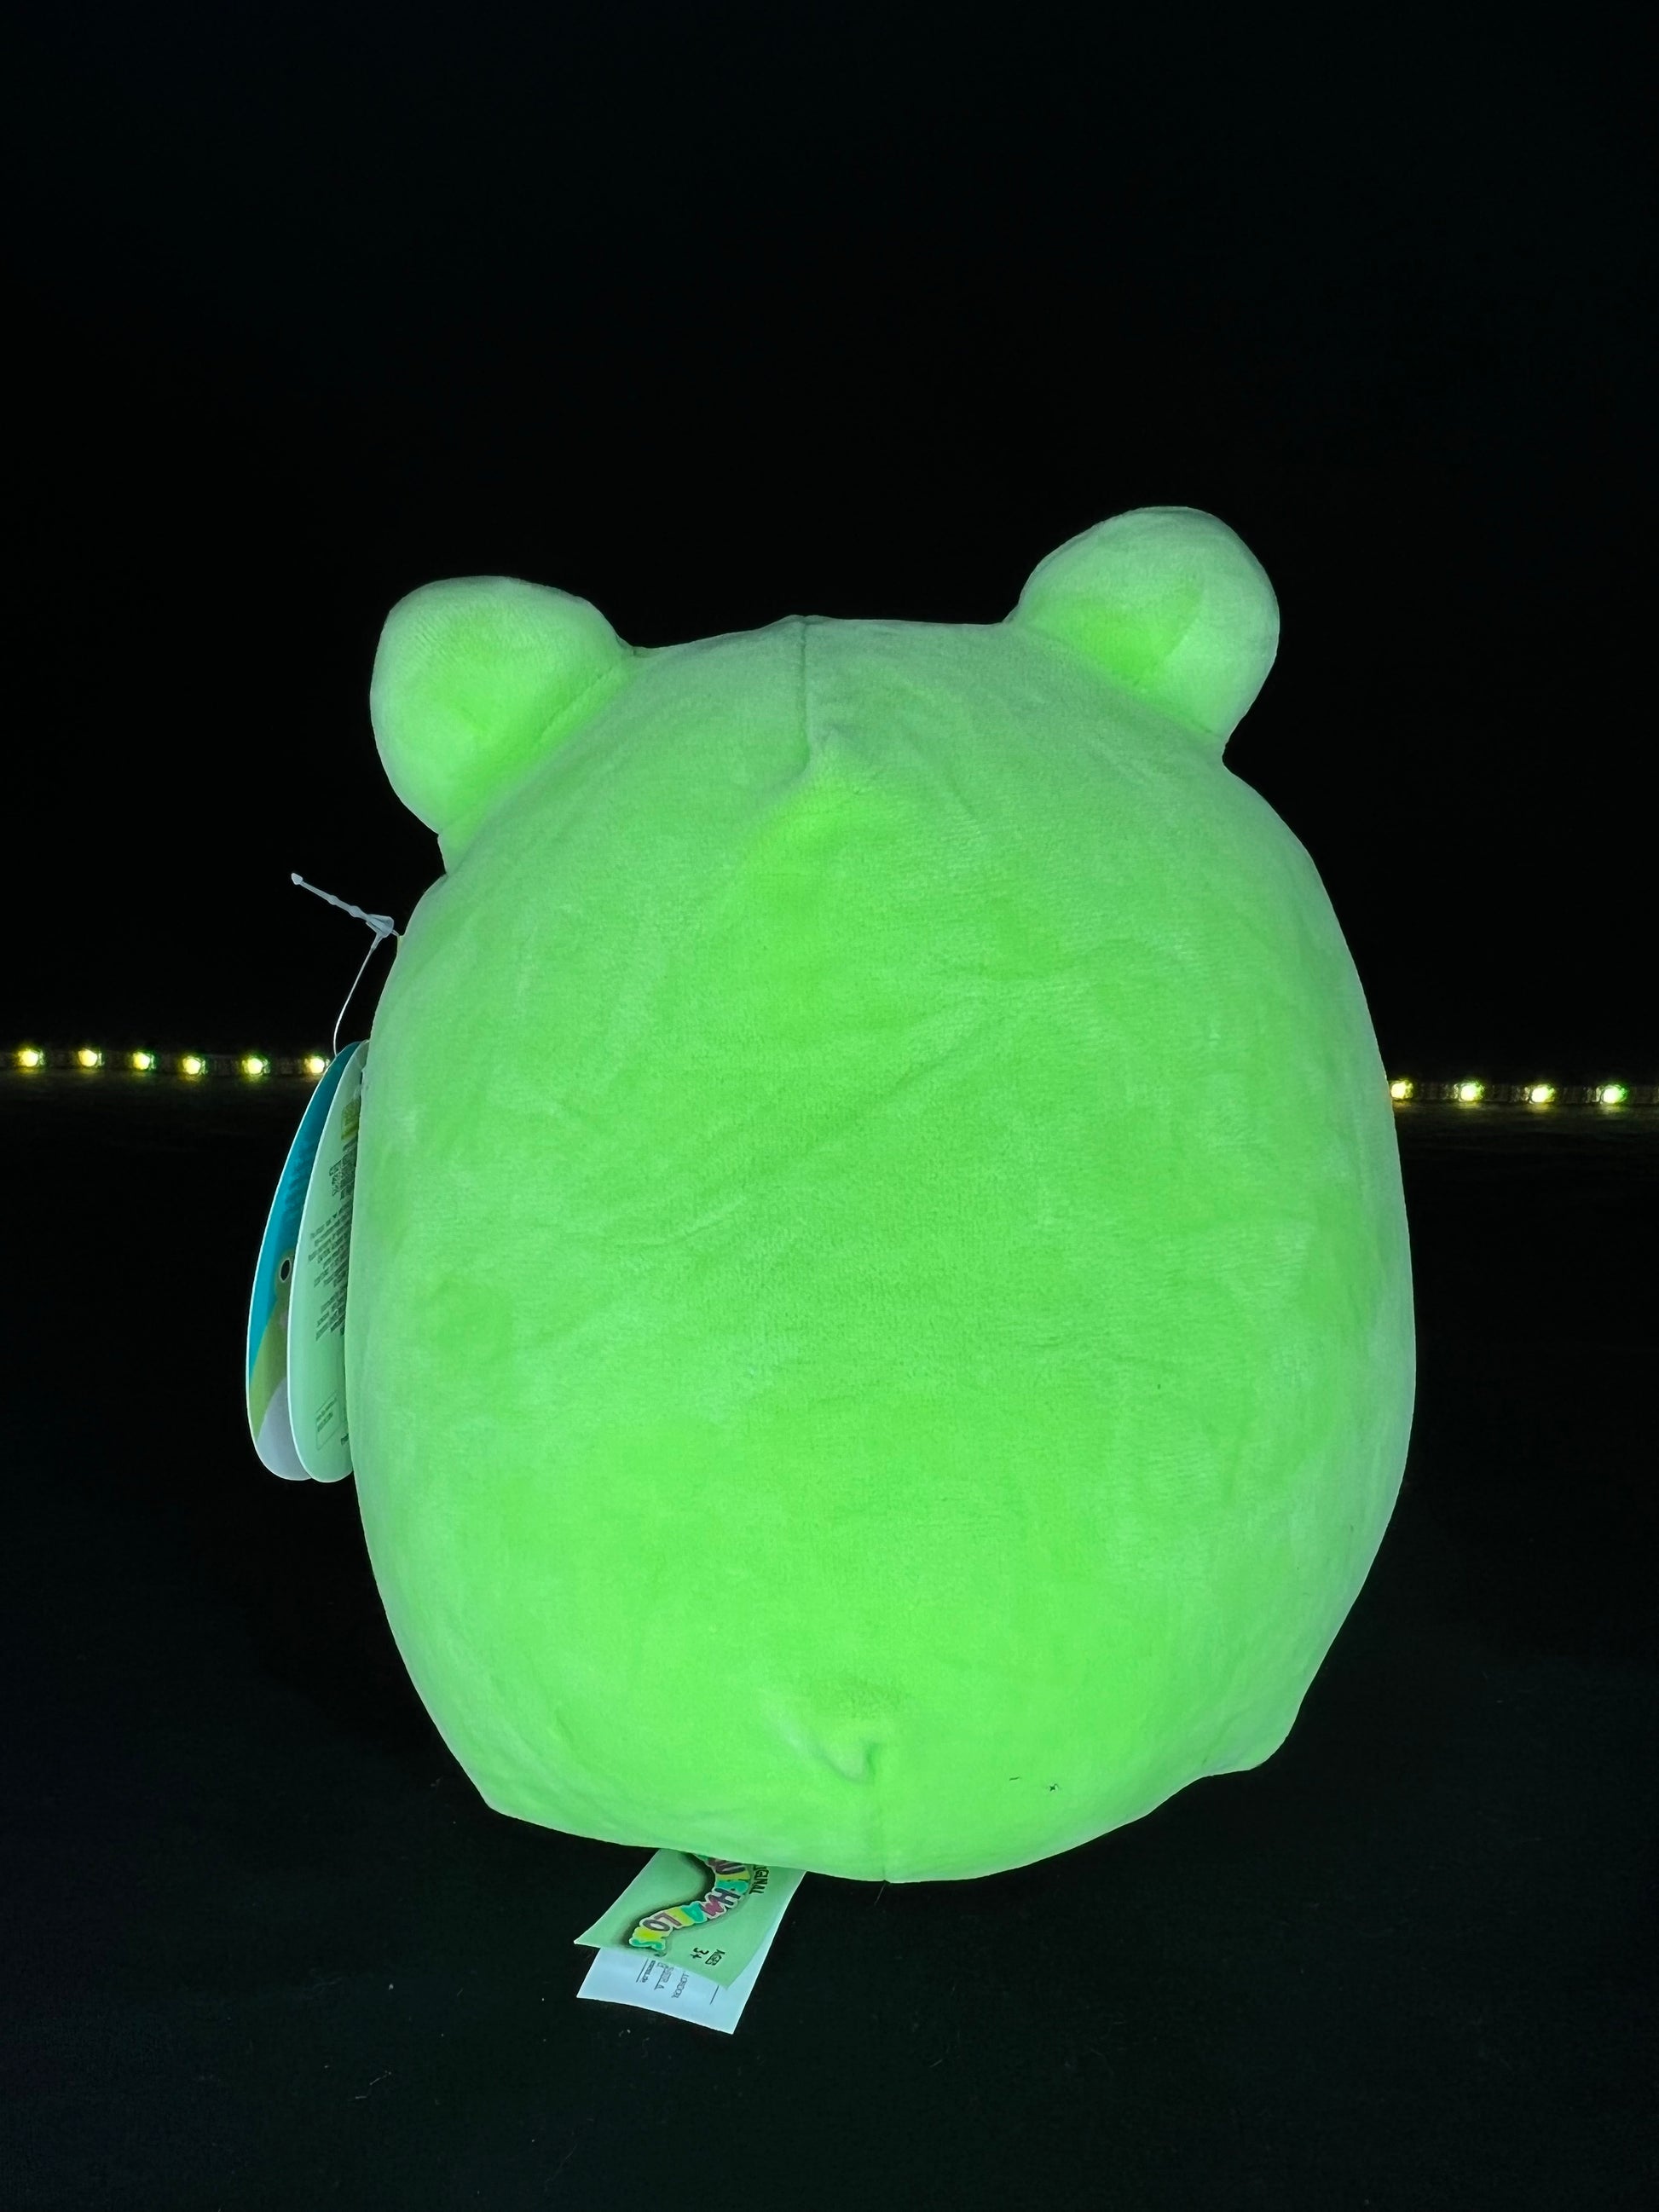 Squishmallow Wendy the Frog Plush